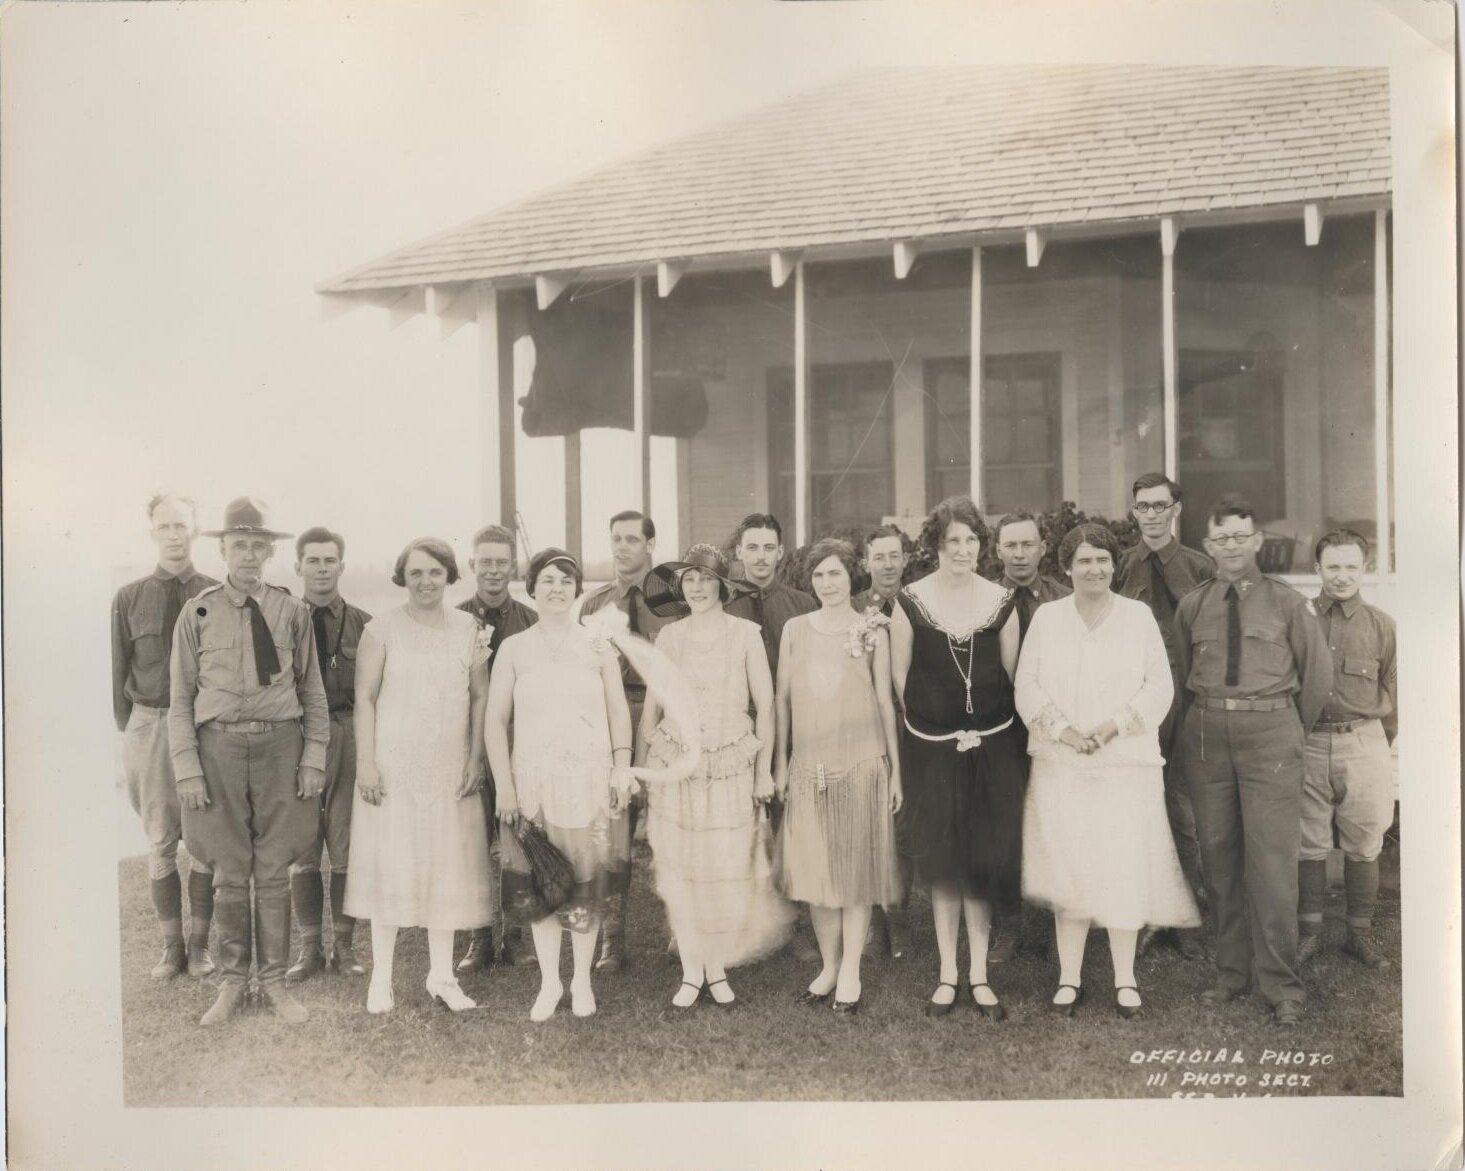  [Official Photograph of Soldiers and Women], photograph, 1928~; (https://texashistory.unt.edu/ark:/67531/metapth992141/m1/1/: accessed June 5, 2019), University of North Texas Libraries, The Portal to Texas History, https://texashistory.unt.edu; cre